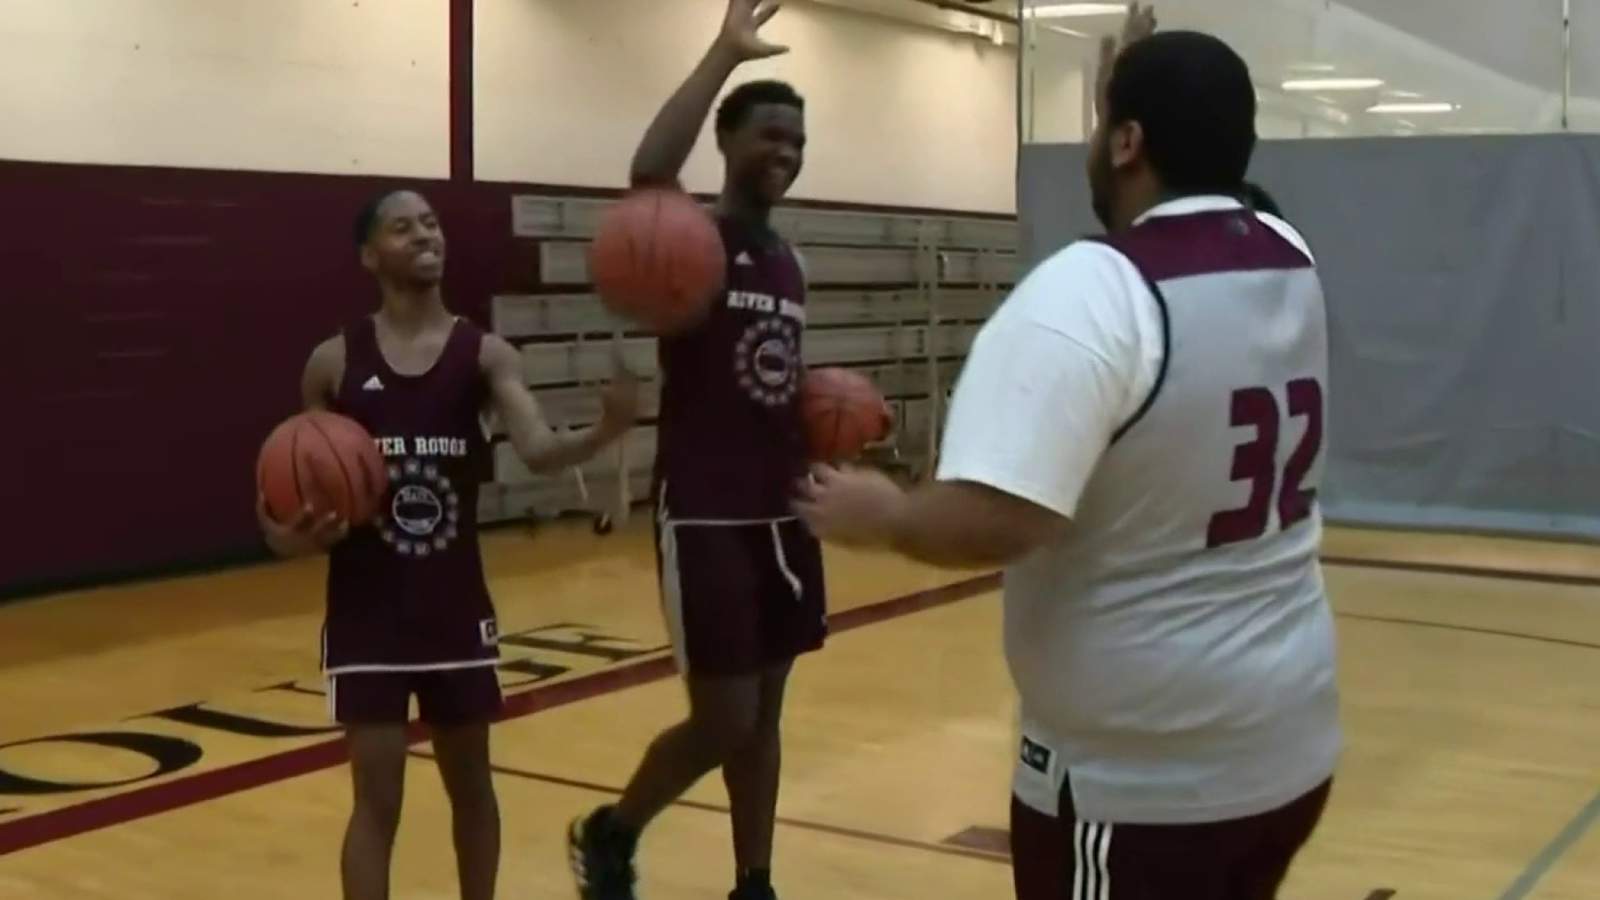 Dream comes true for student with autism when River Rouge basketball coach puts him in game